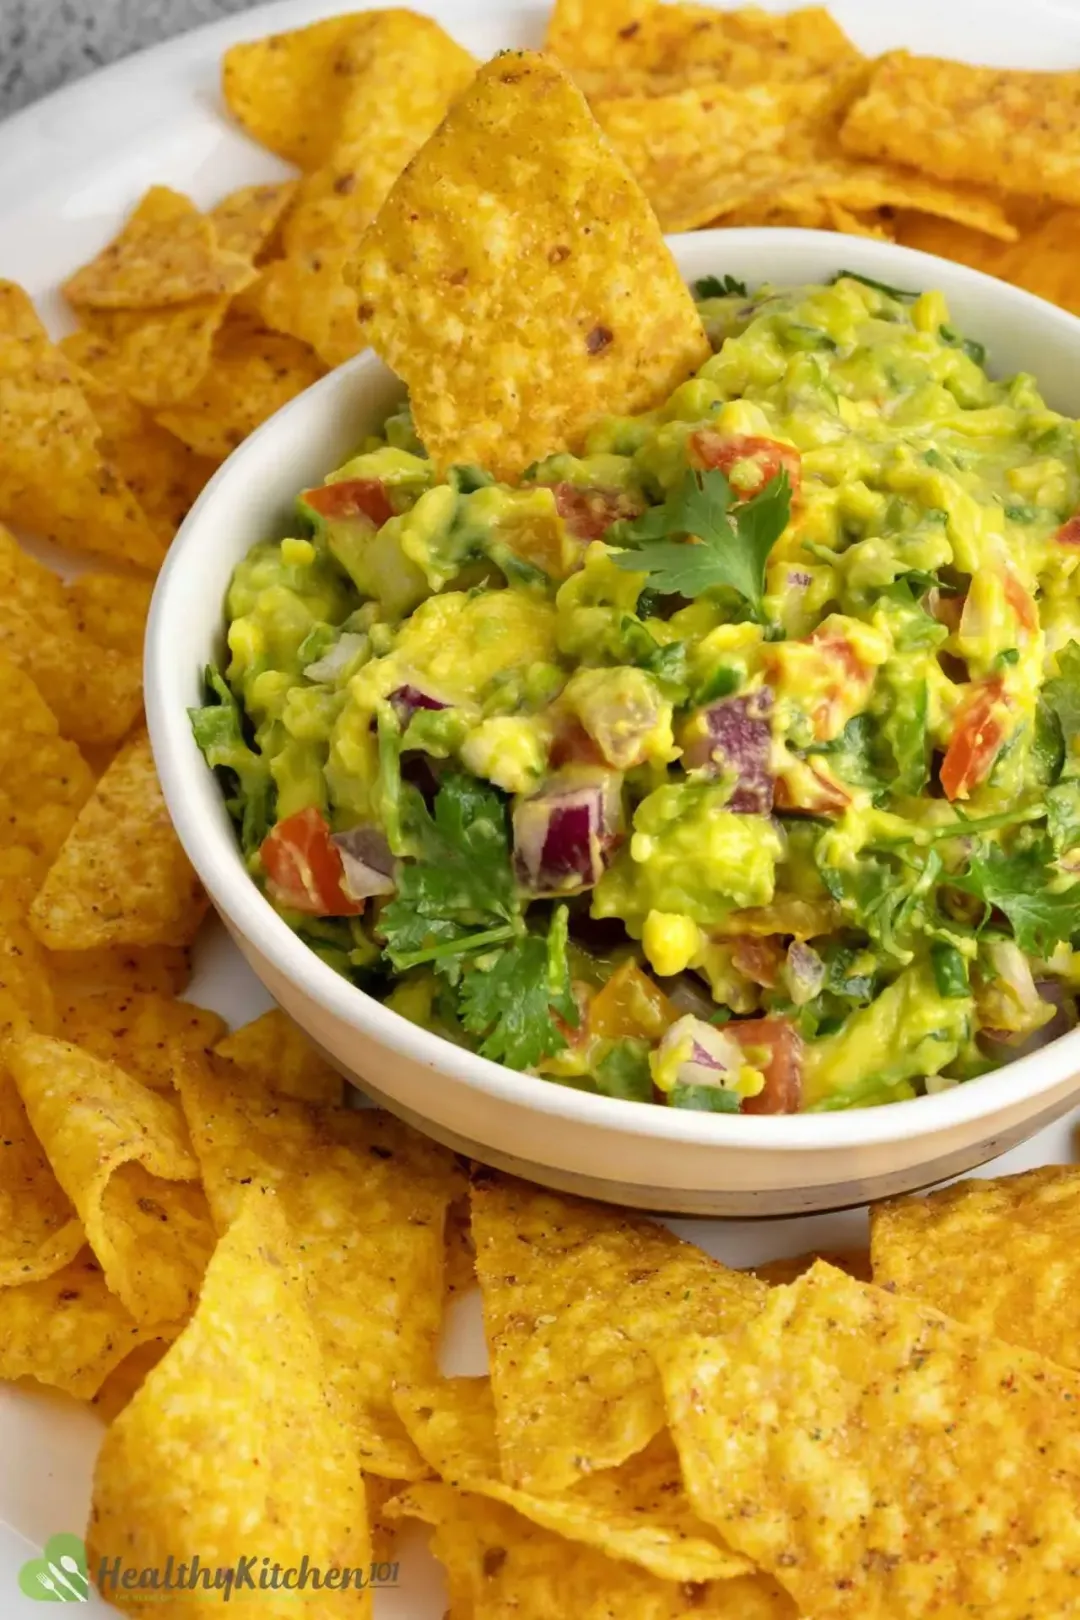 A bowl of guacamole surrounded by chips on a white plate